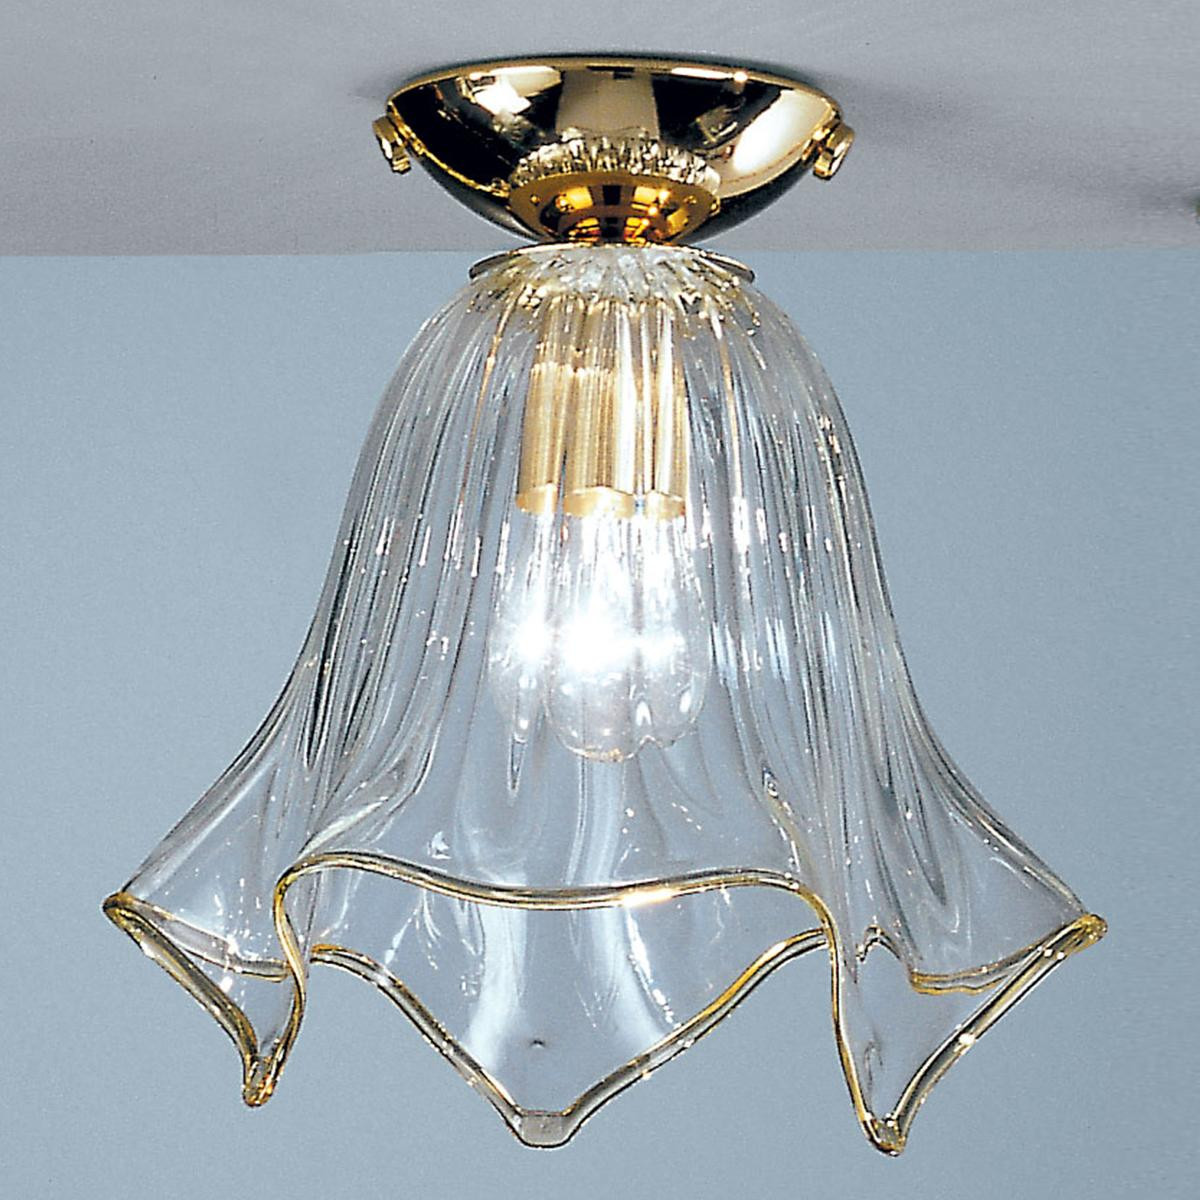 "Fazzoletto" Murano glass ceiling light - transparent and amber